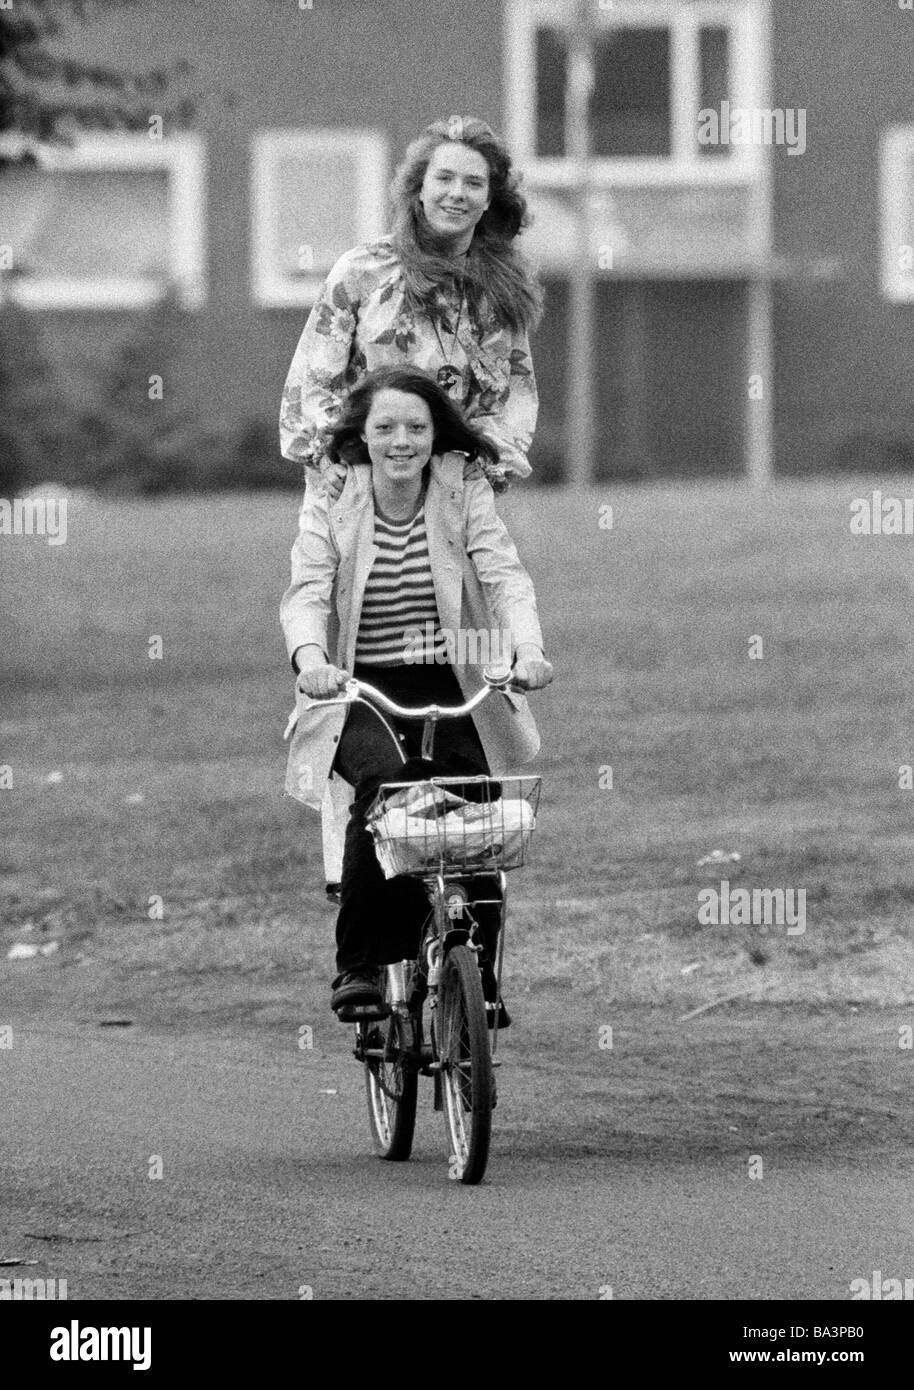 Seventies, black and white photo, people, two young girls drive on one bicycle, one girl stands on the pannier rack, humour, fun, aged 18 to 22 years Stock Photo